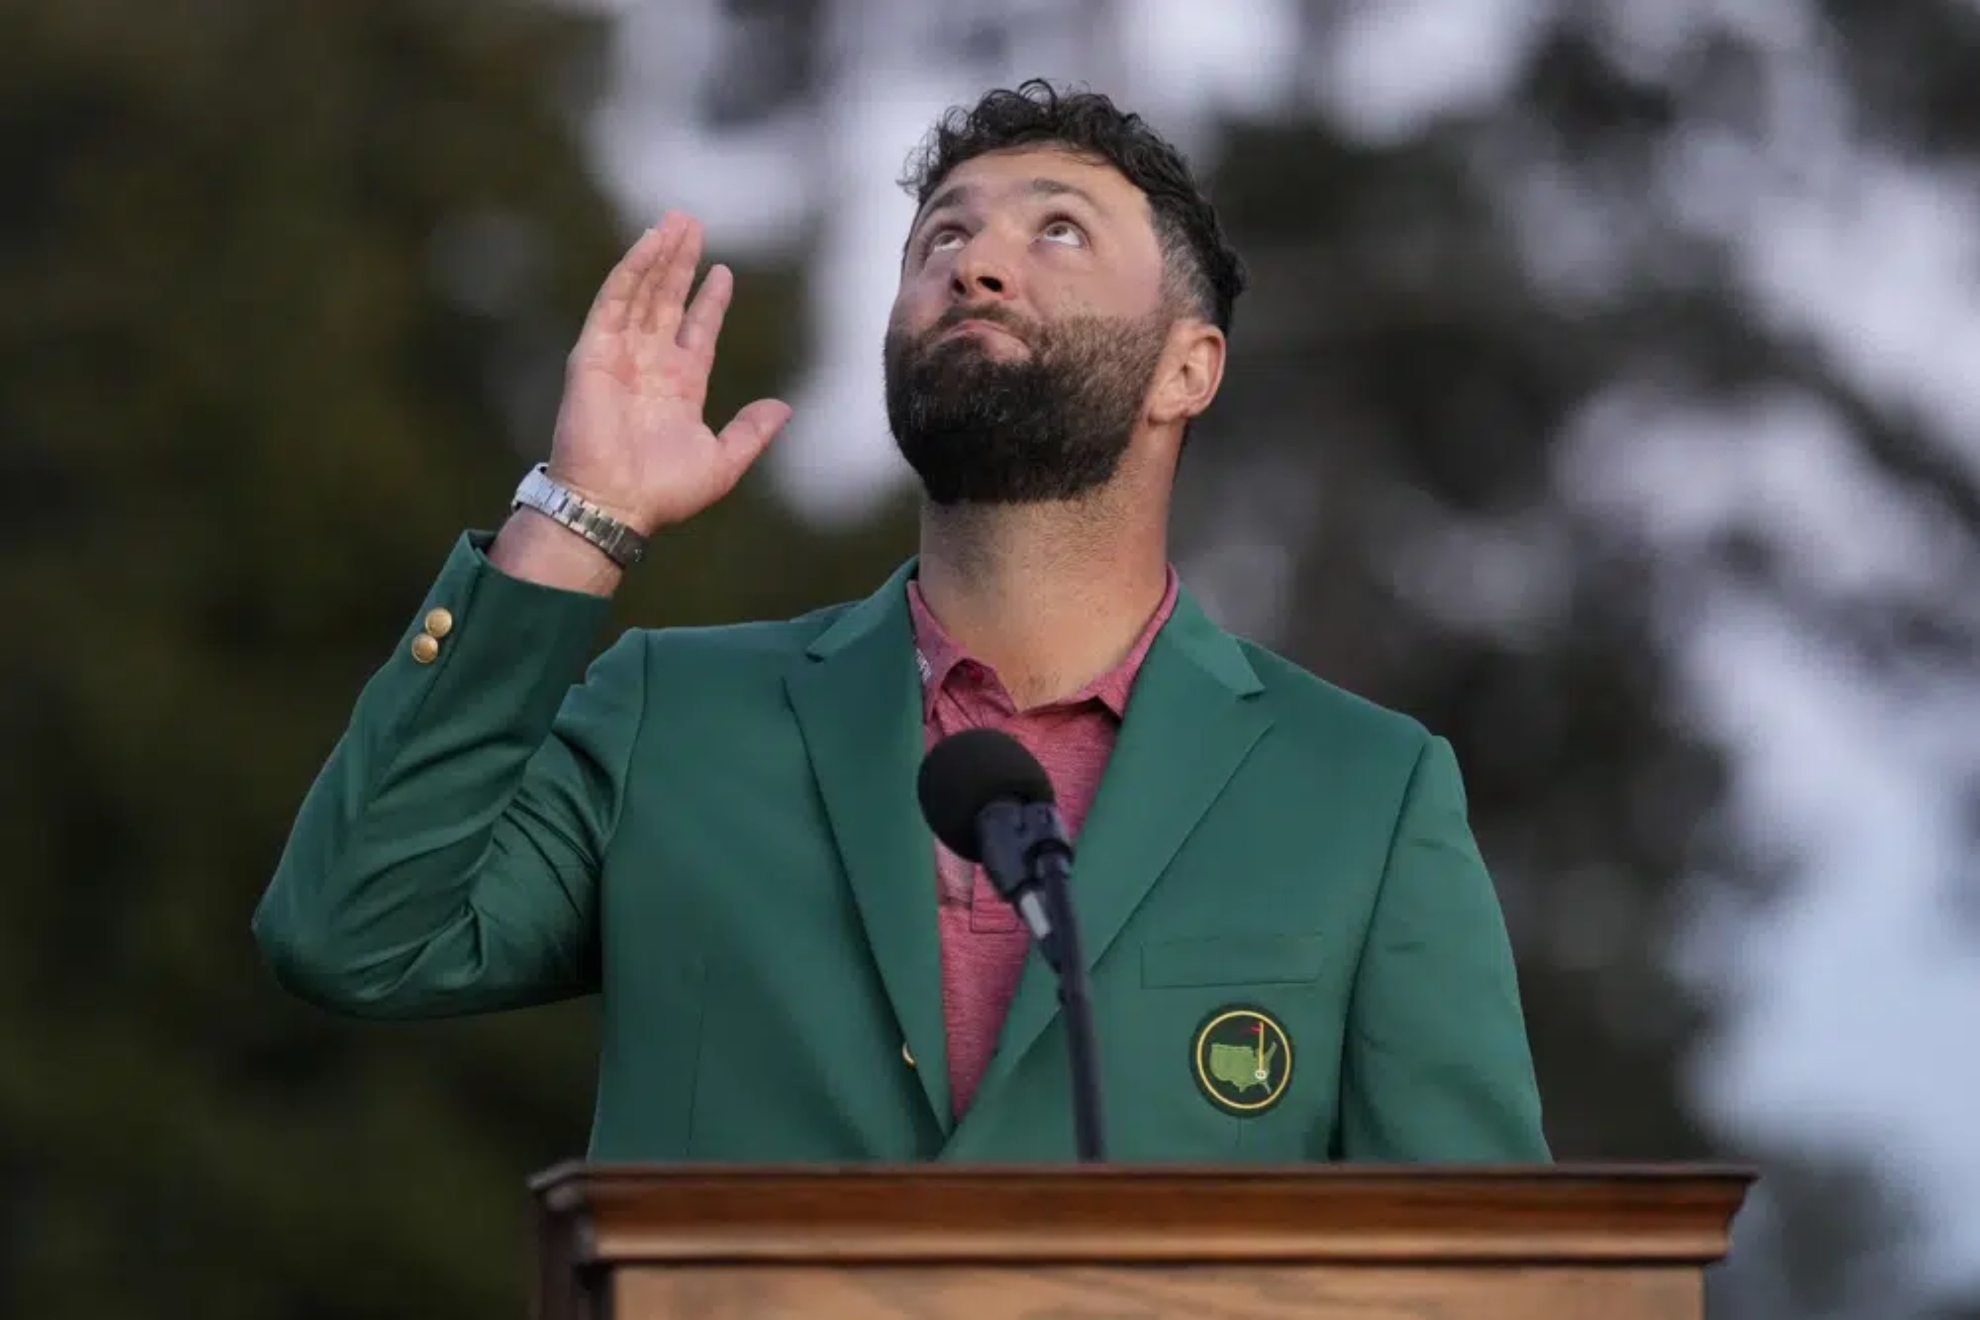 Jon Rahm talked about what he might be serving at the Champions dinner at Augusta National.